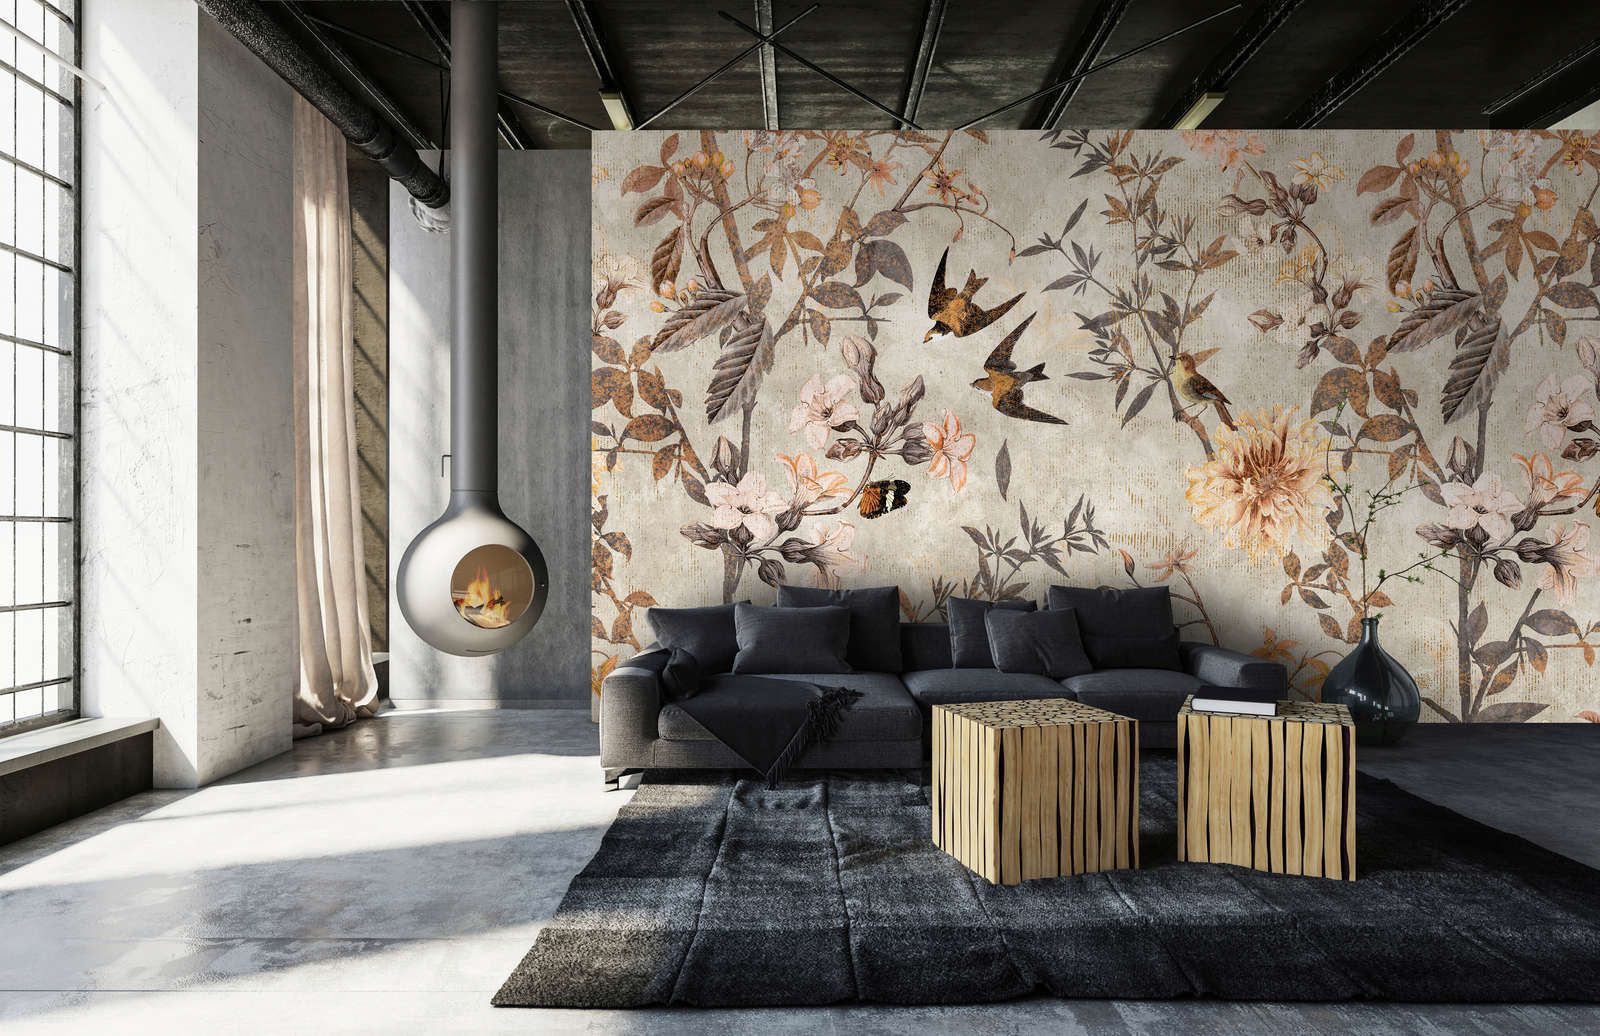             Photo wallpaper »eden« - Vintage style birds & flowers - Lightly textured non-woven fabric
        